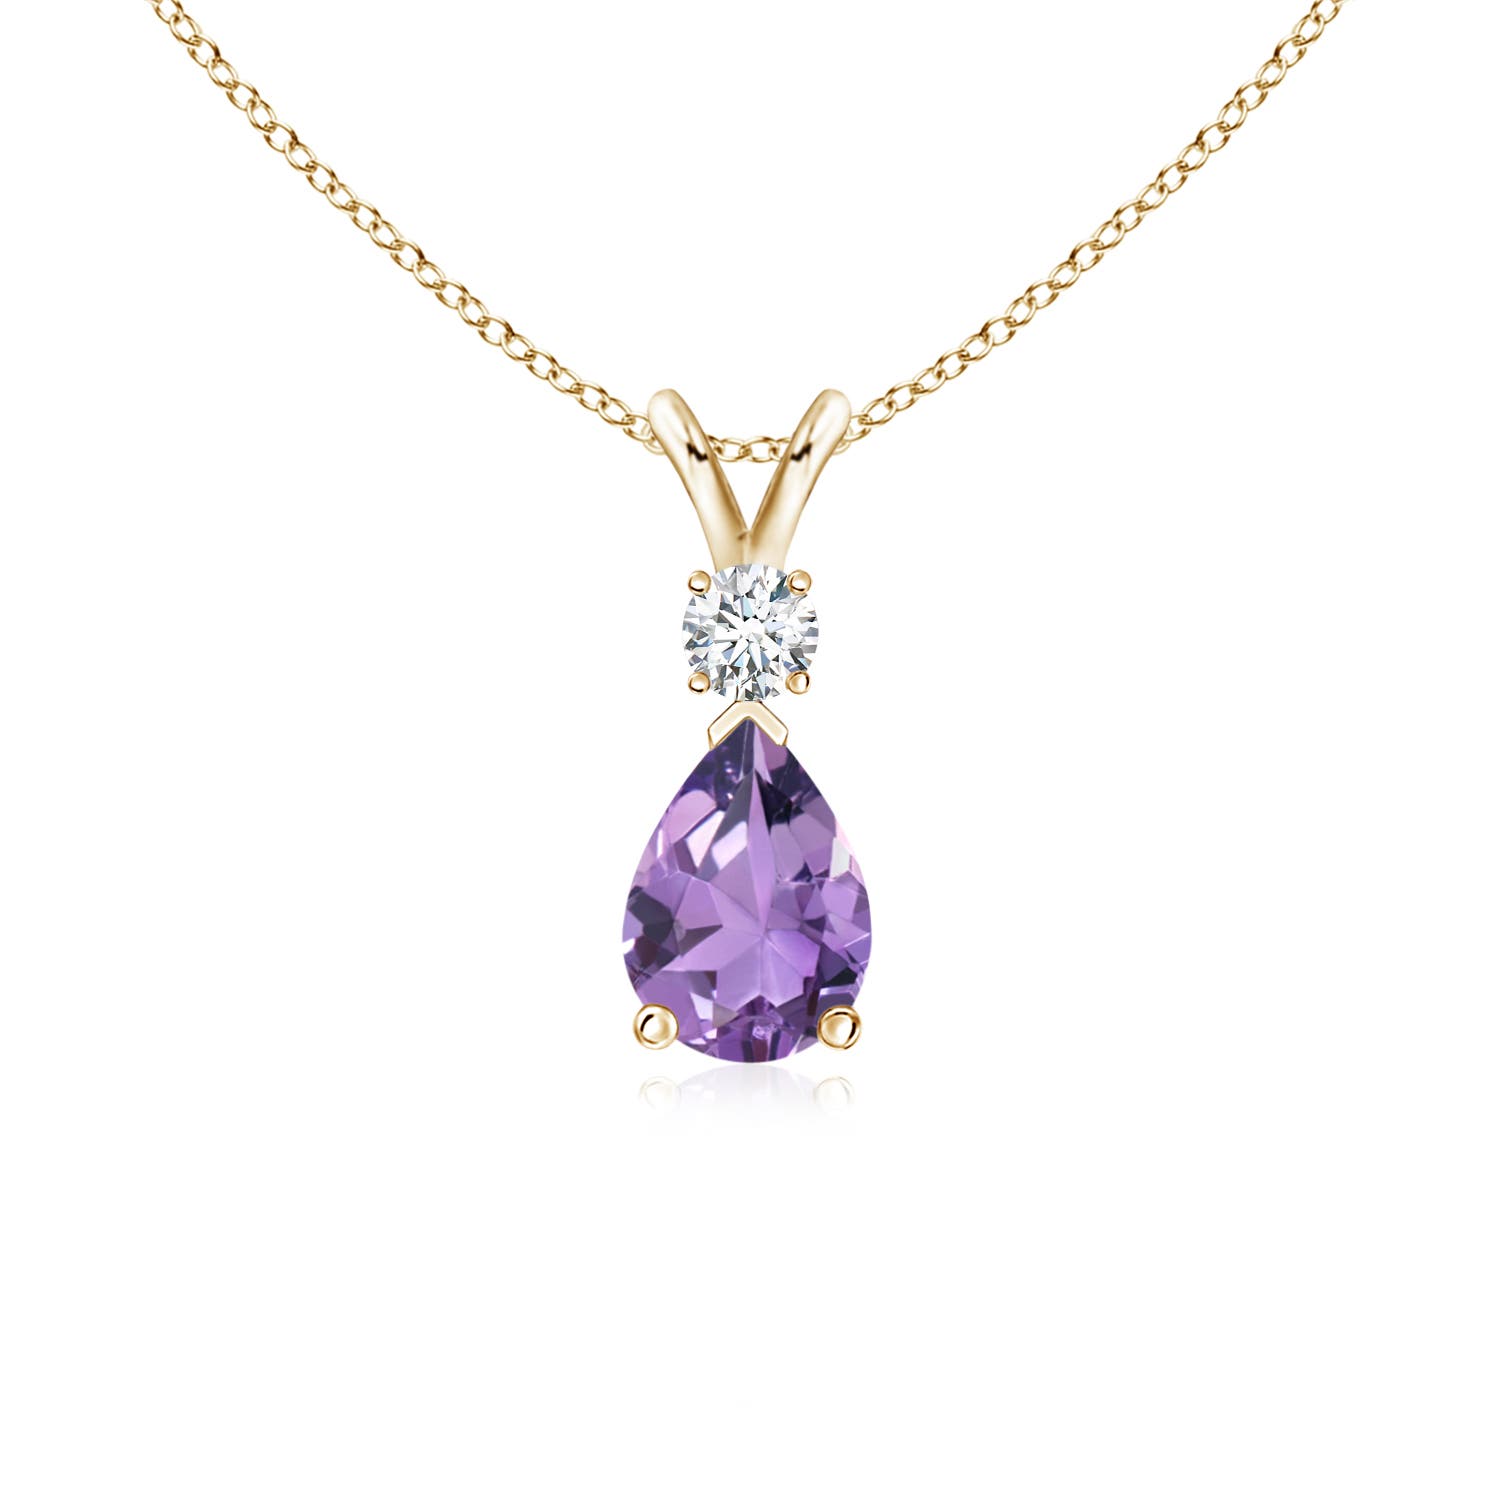 A - Amethyst / 0.67 CT / 14 KT Yellow Gold